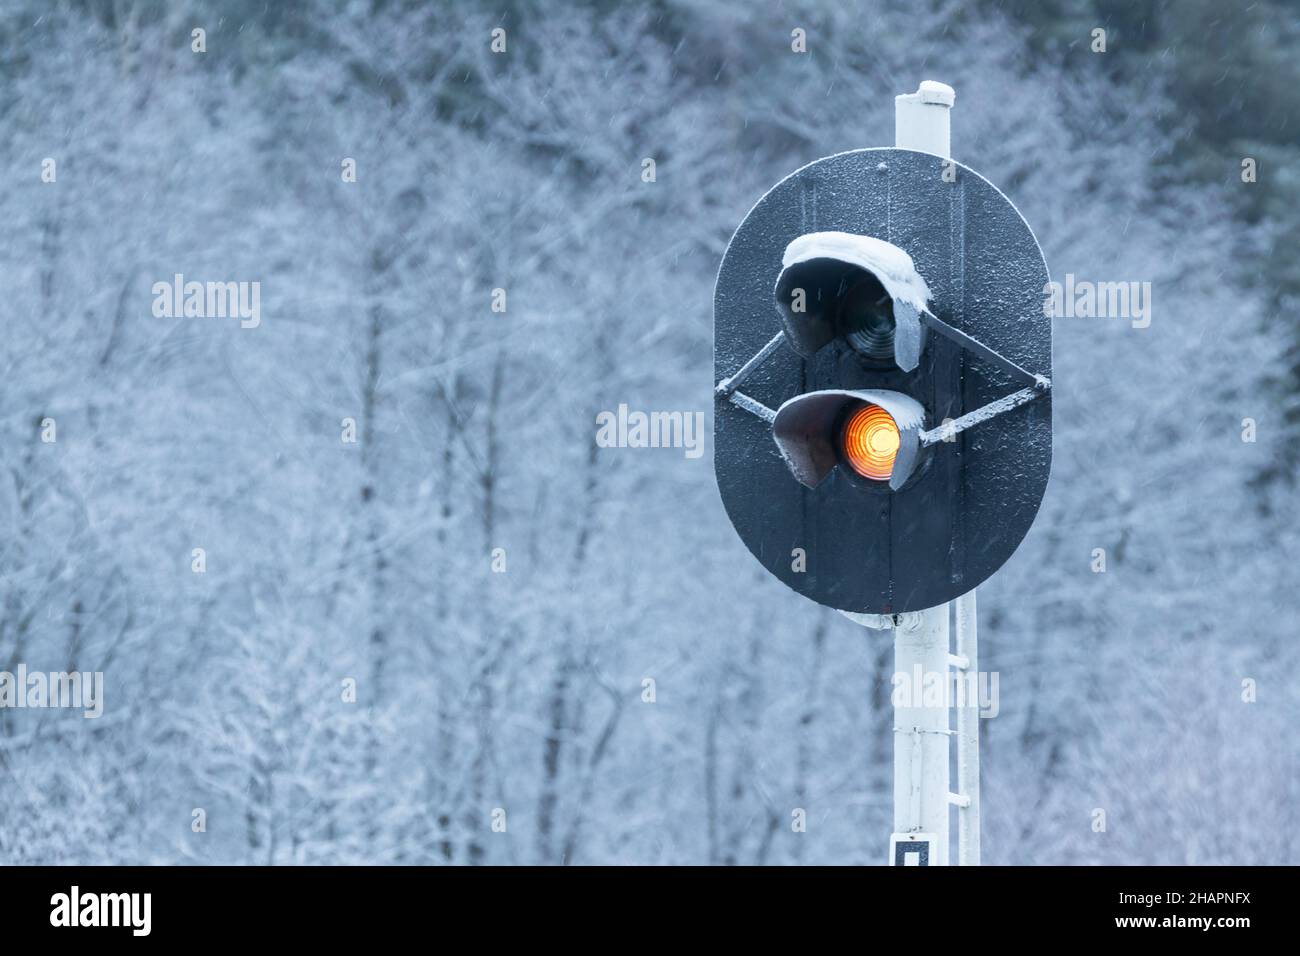 Colour-light signals show danger  red light, close up photo taken on a cold snowy day Stock Photo